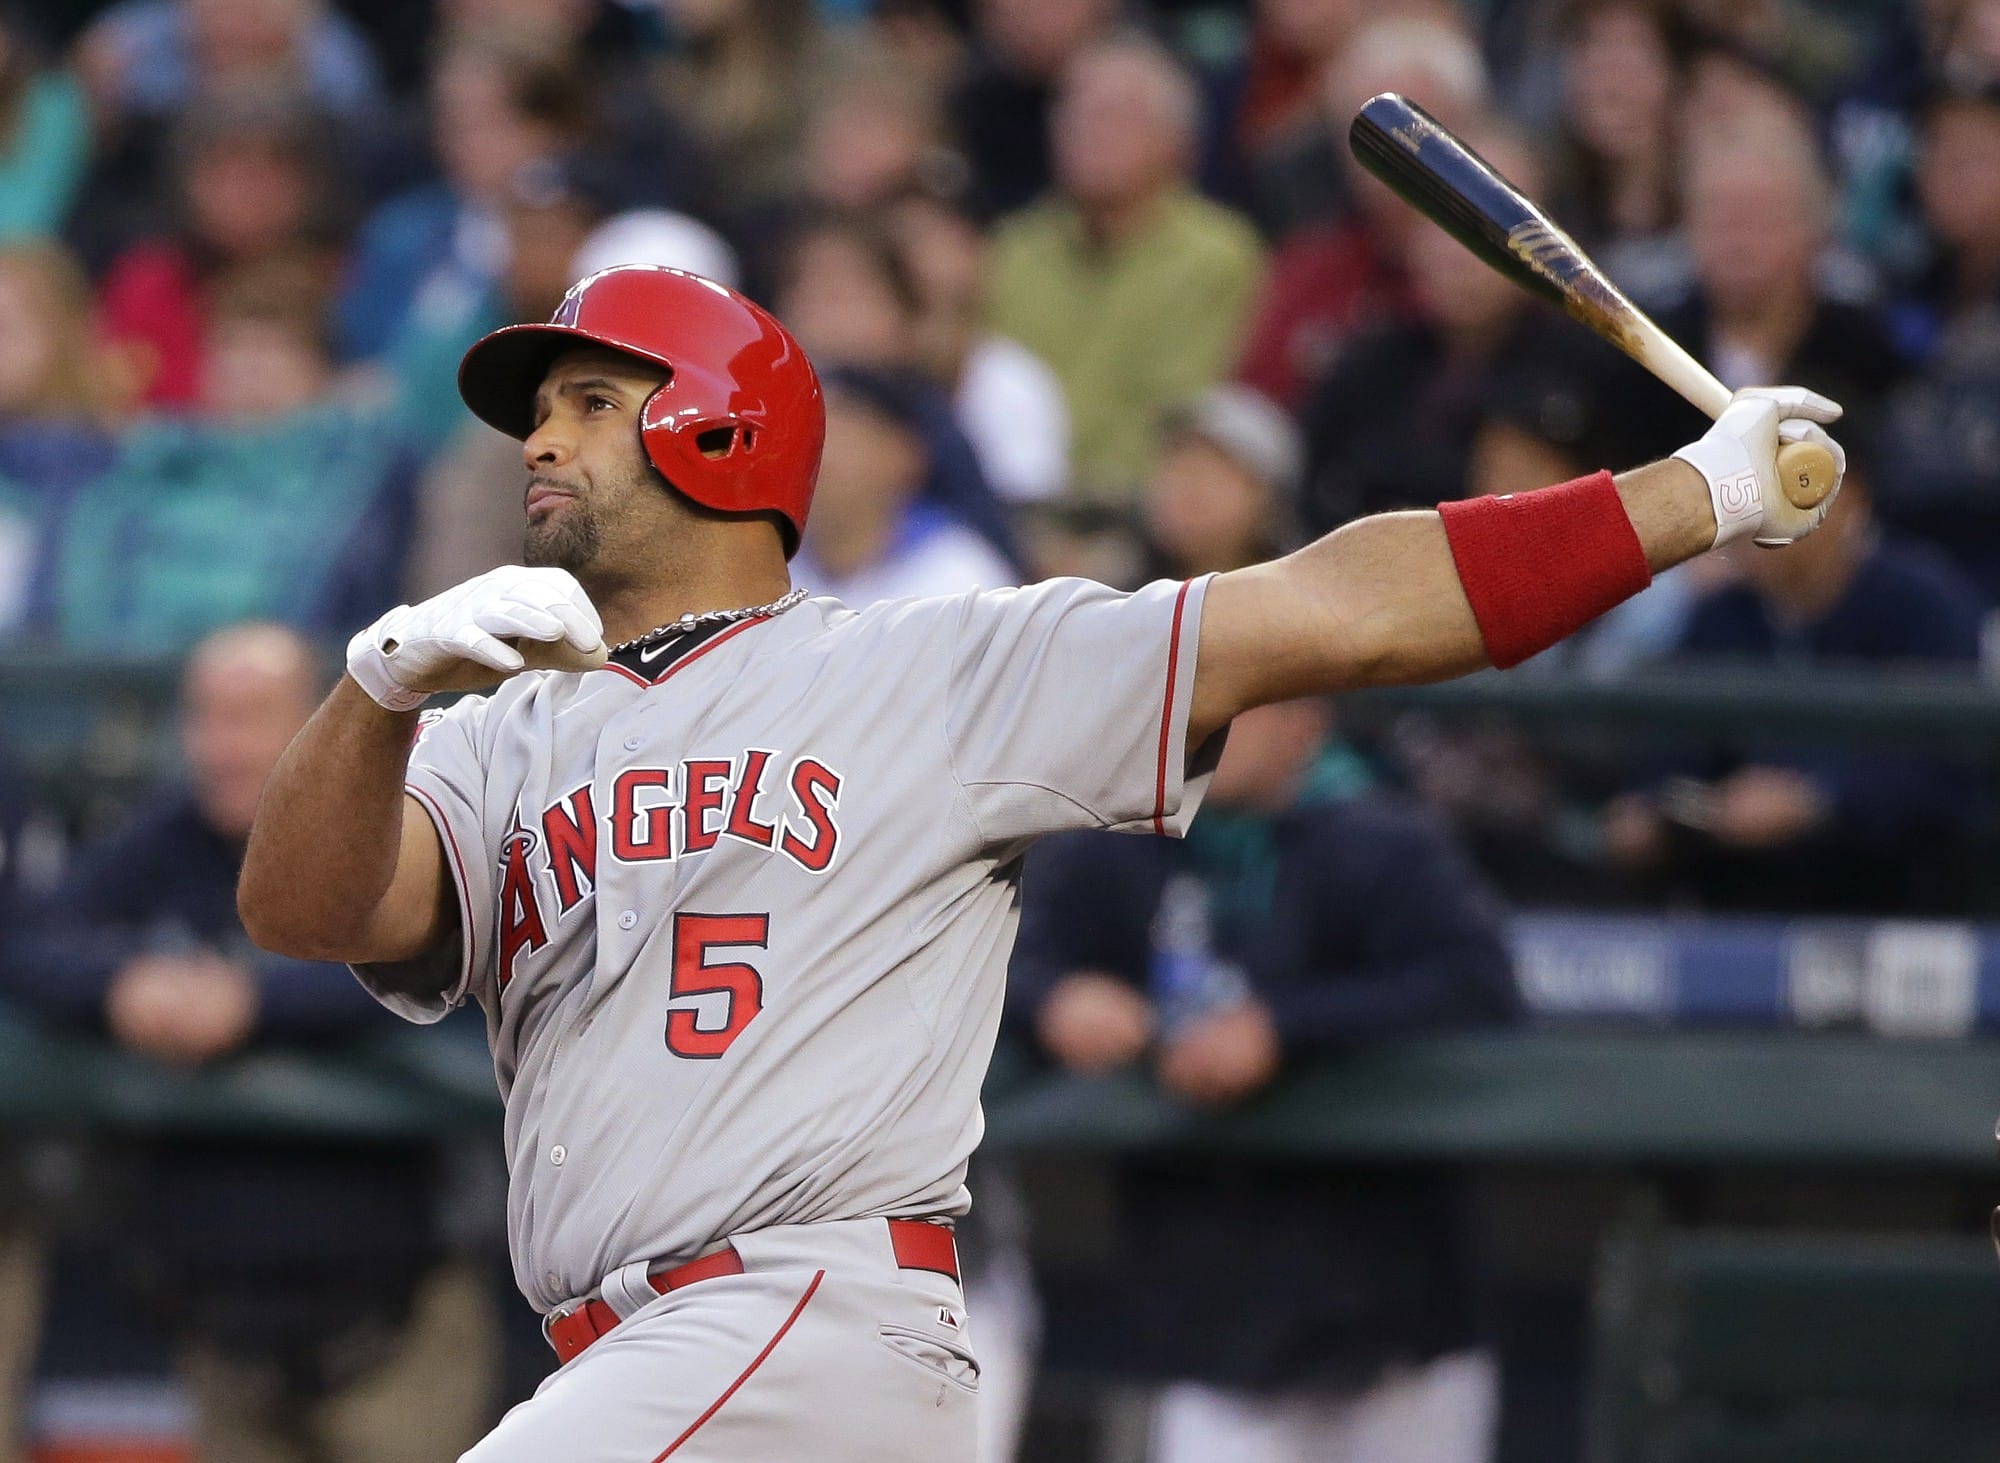 Los Angeles Angels' Albert Pujols watches his two-run home run in the first inning of a baseball game against the Seattle Mariners, Wednesday, April 8, 2015, in Seattle. (AP Photo/Ted S.